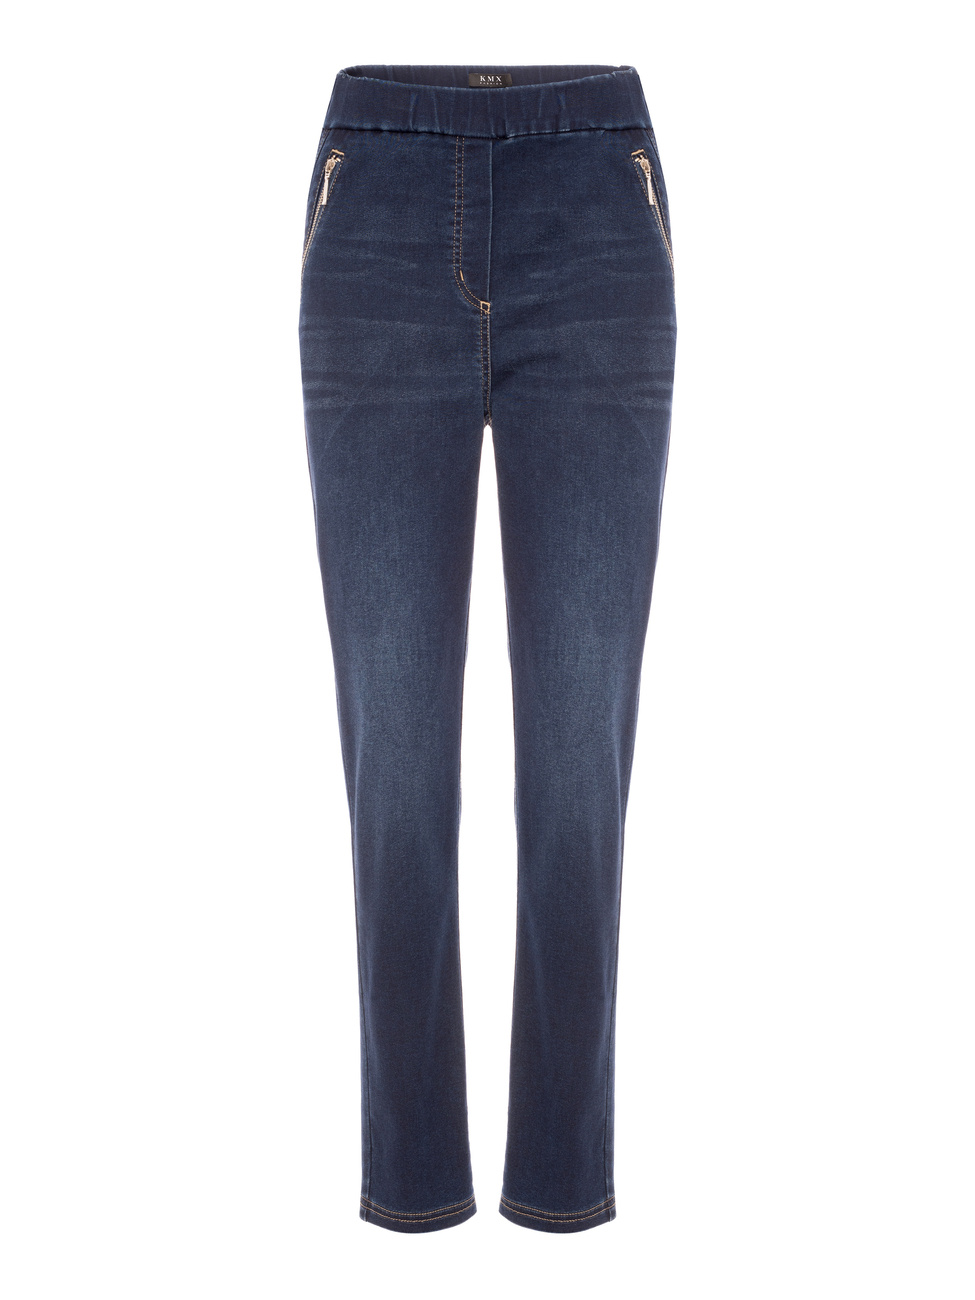 Fitted denim-like stretch pants